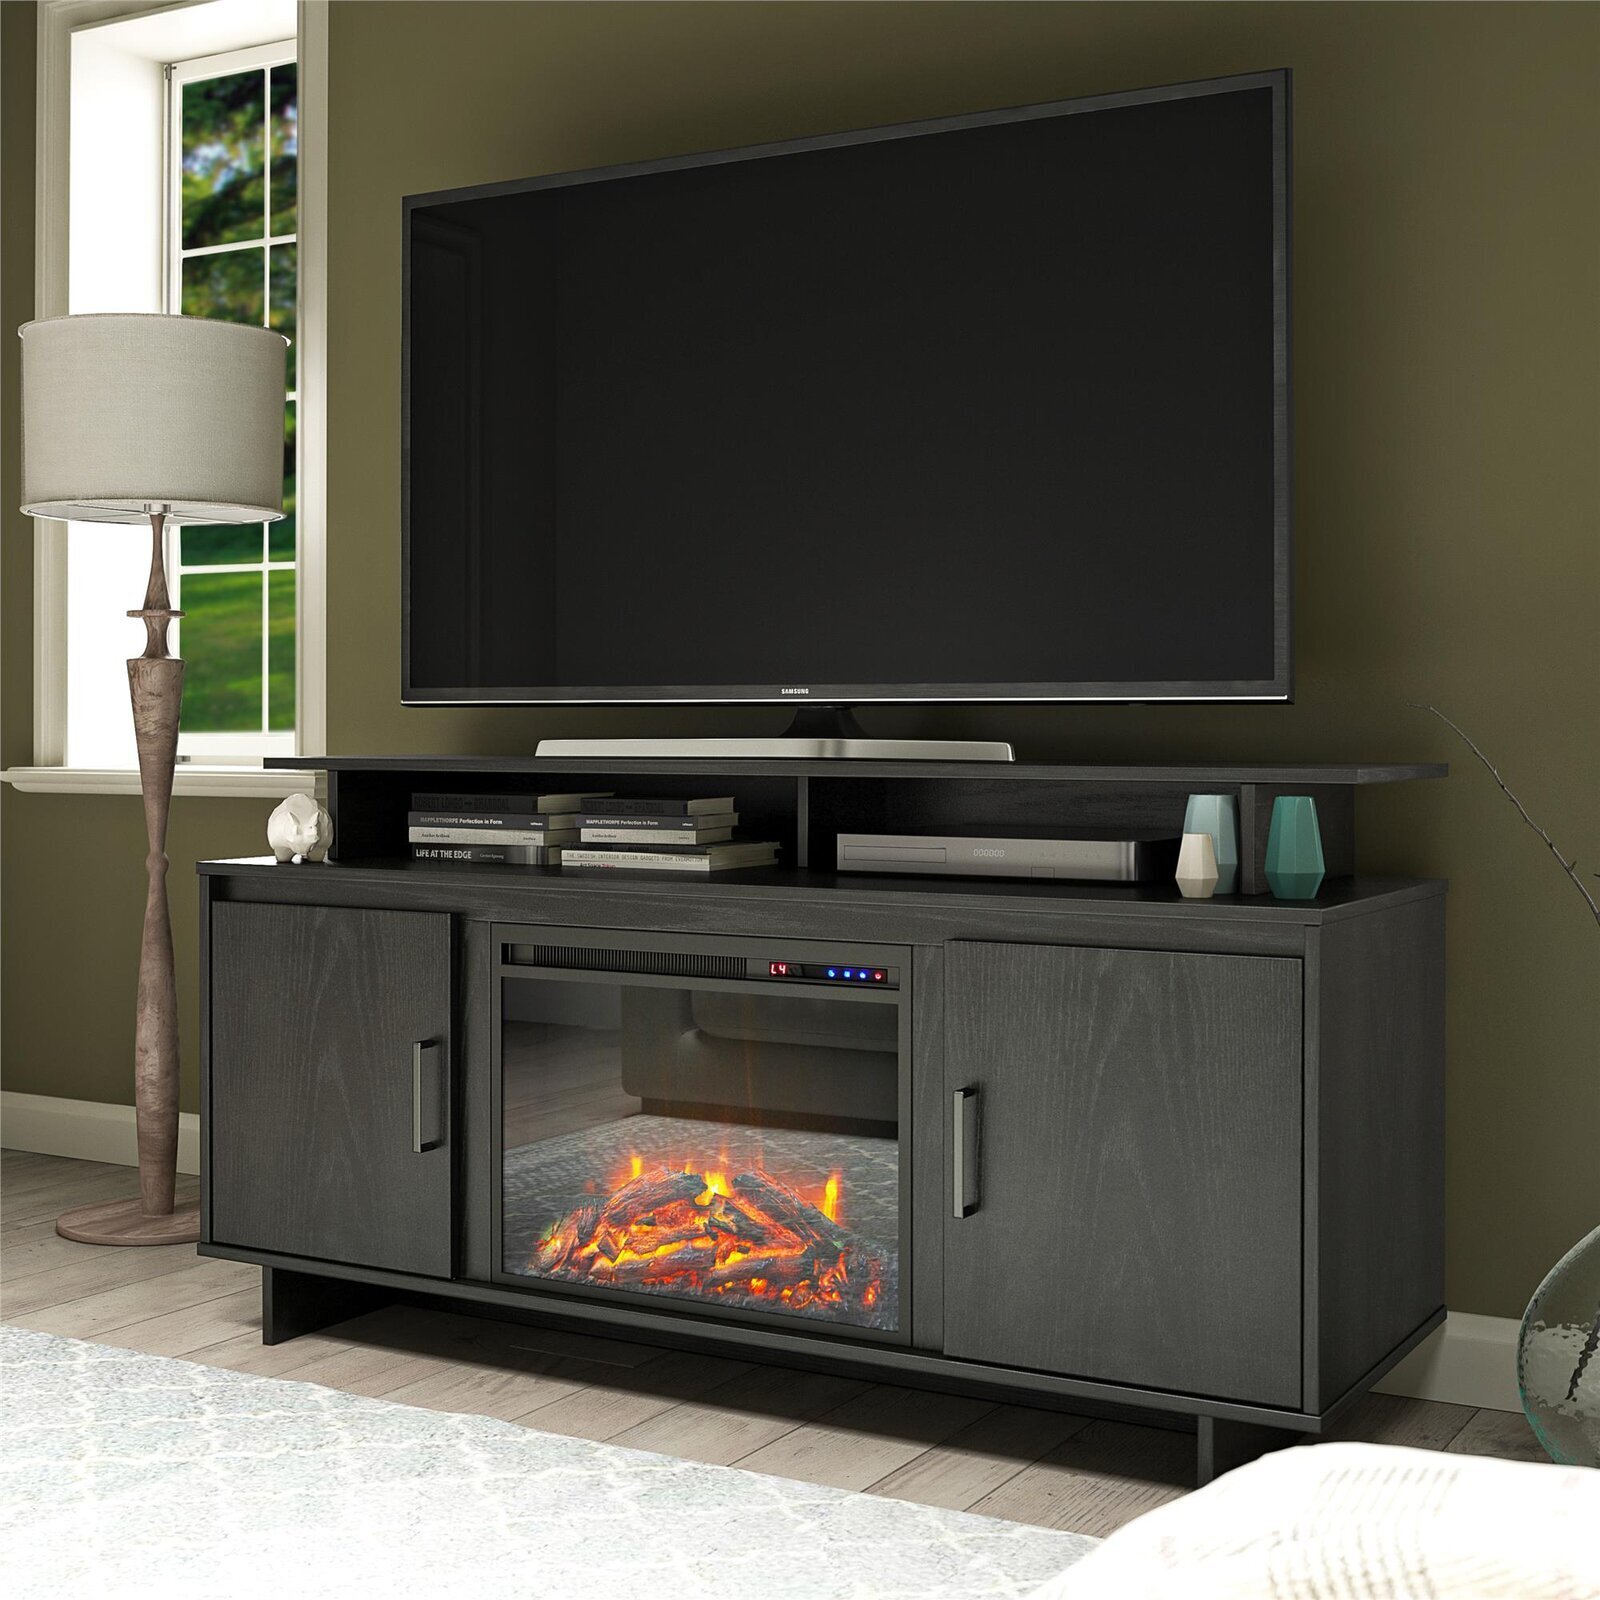 Standard Black TV Stand With Fireplace